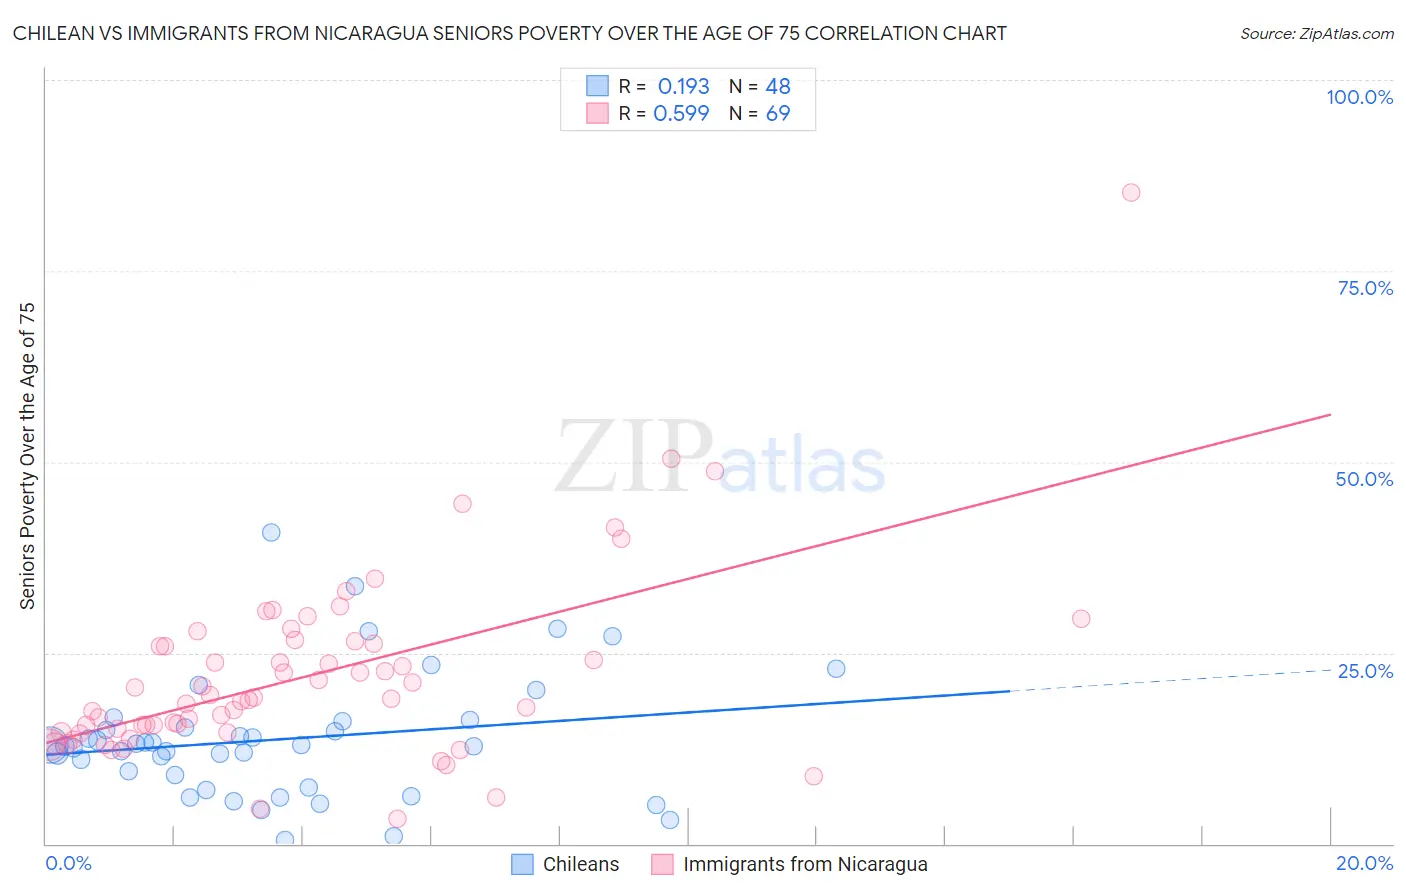 Chilean vs Immigrants from Nicaragua Seniors Poverty Over the Age of 75